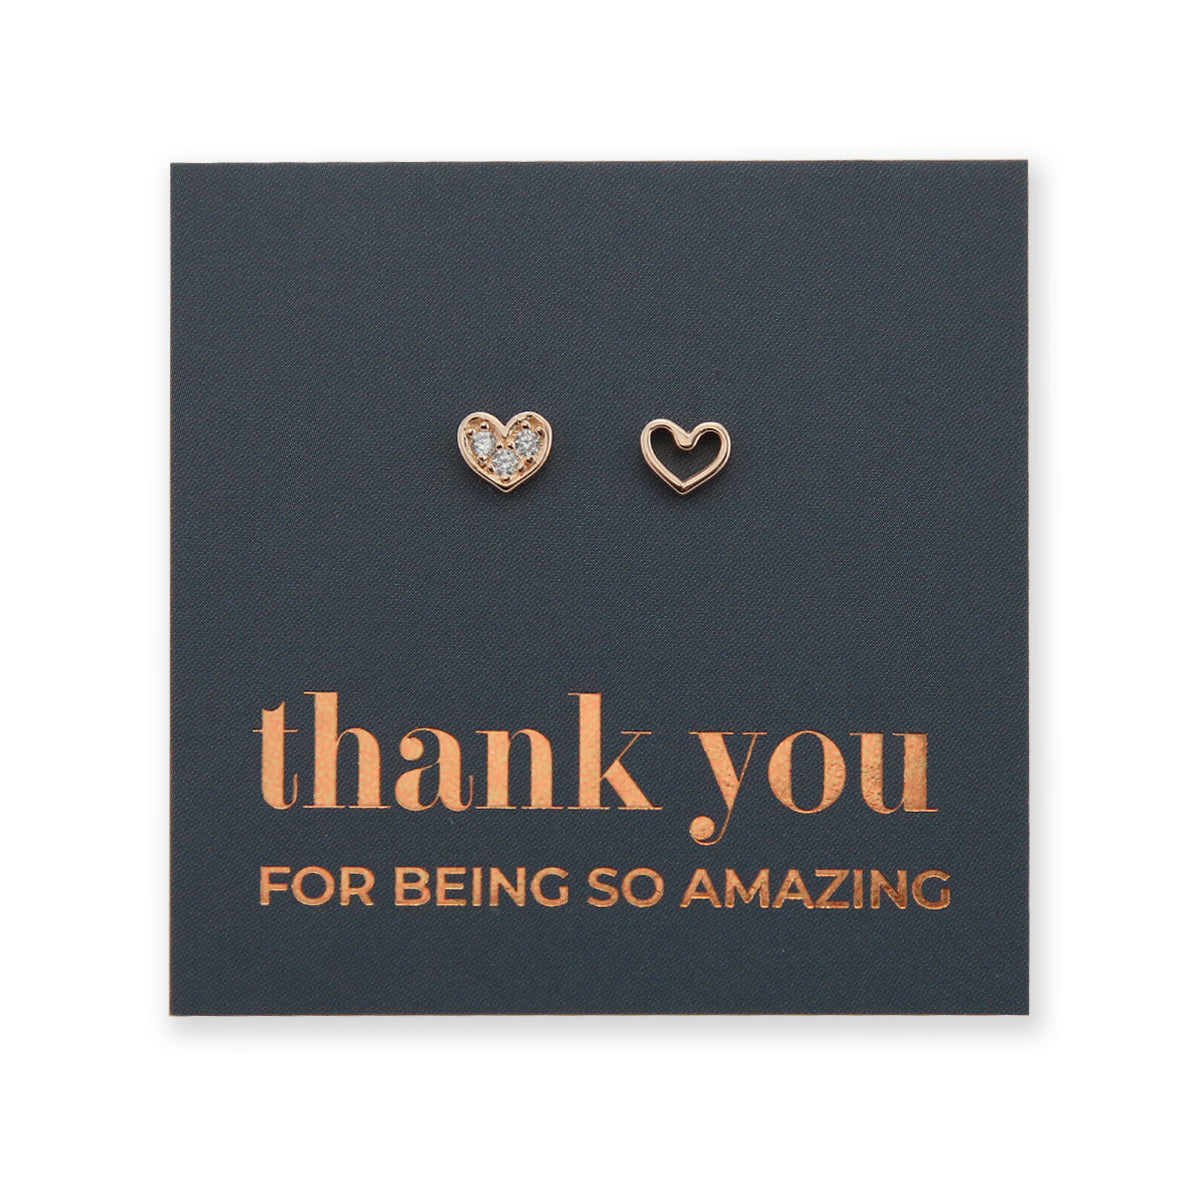 2 Hearts - Rose Gold Sterling Silver Studs + CZ - Thank You For Being So Amazing (8305-RG)